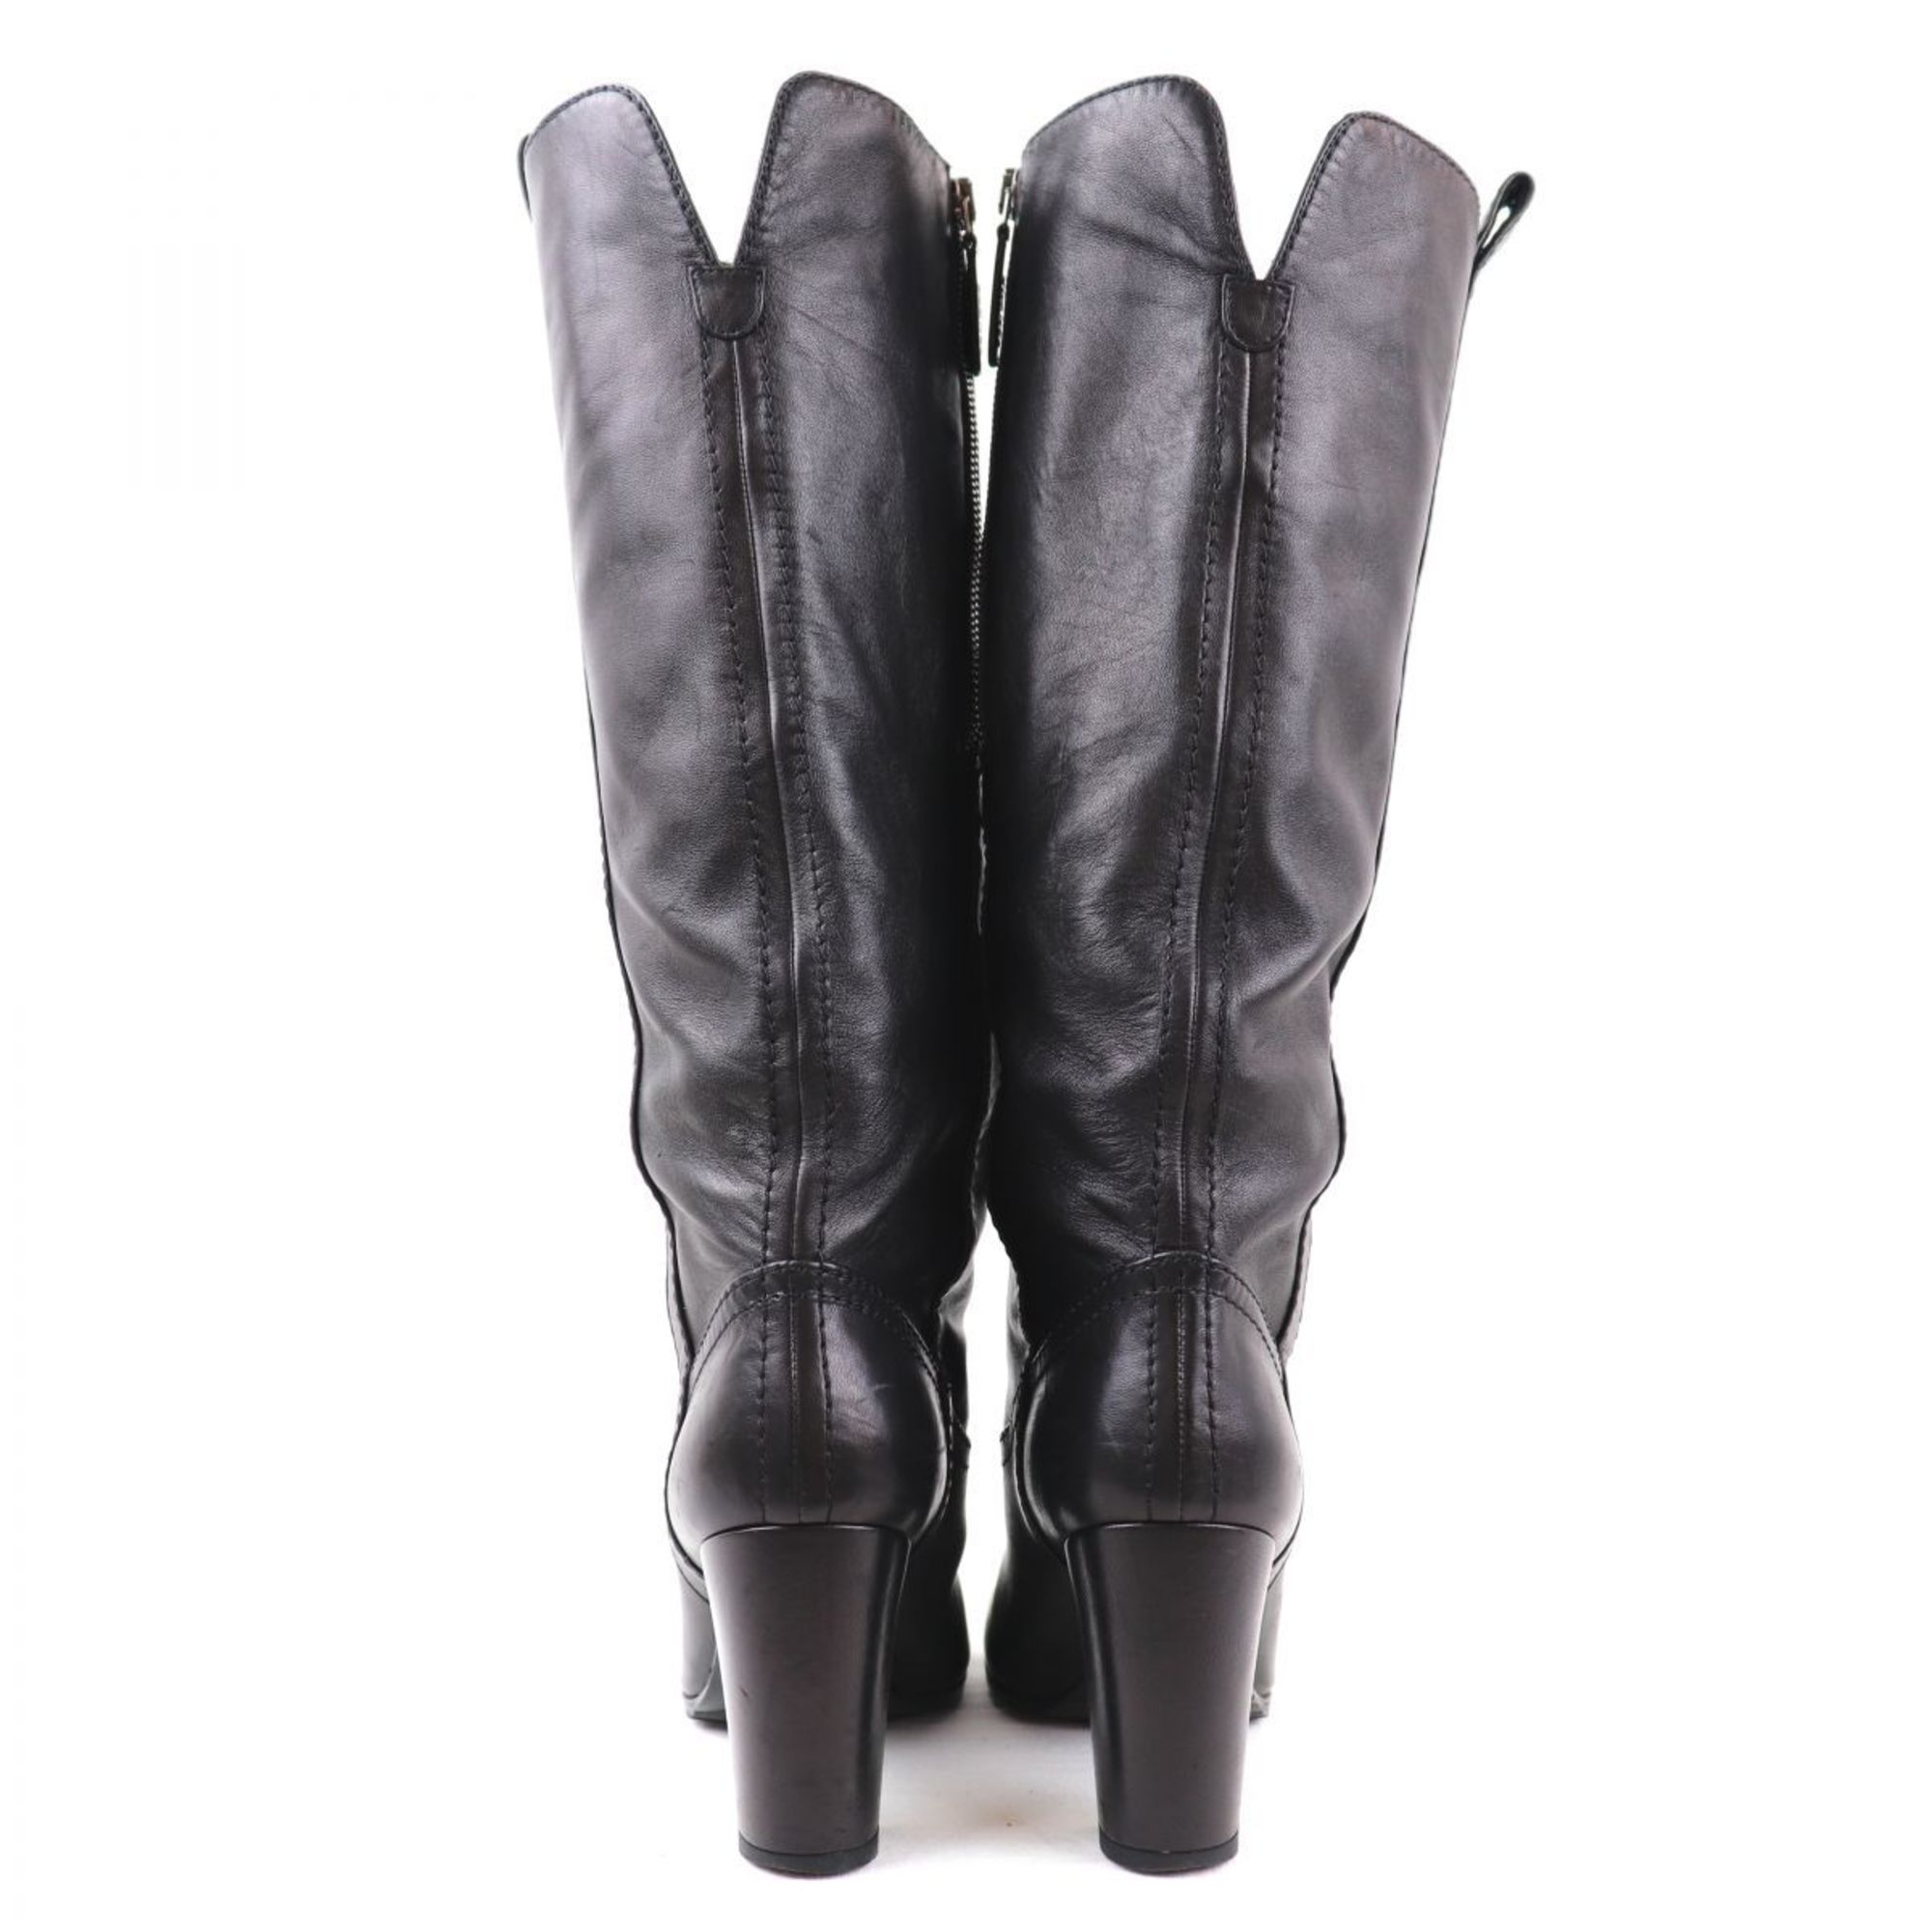 Chanel CHANEL side zip leather long boots ladies 38.5C black R3-7485